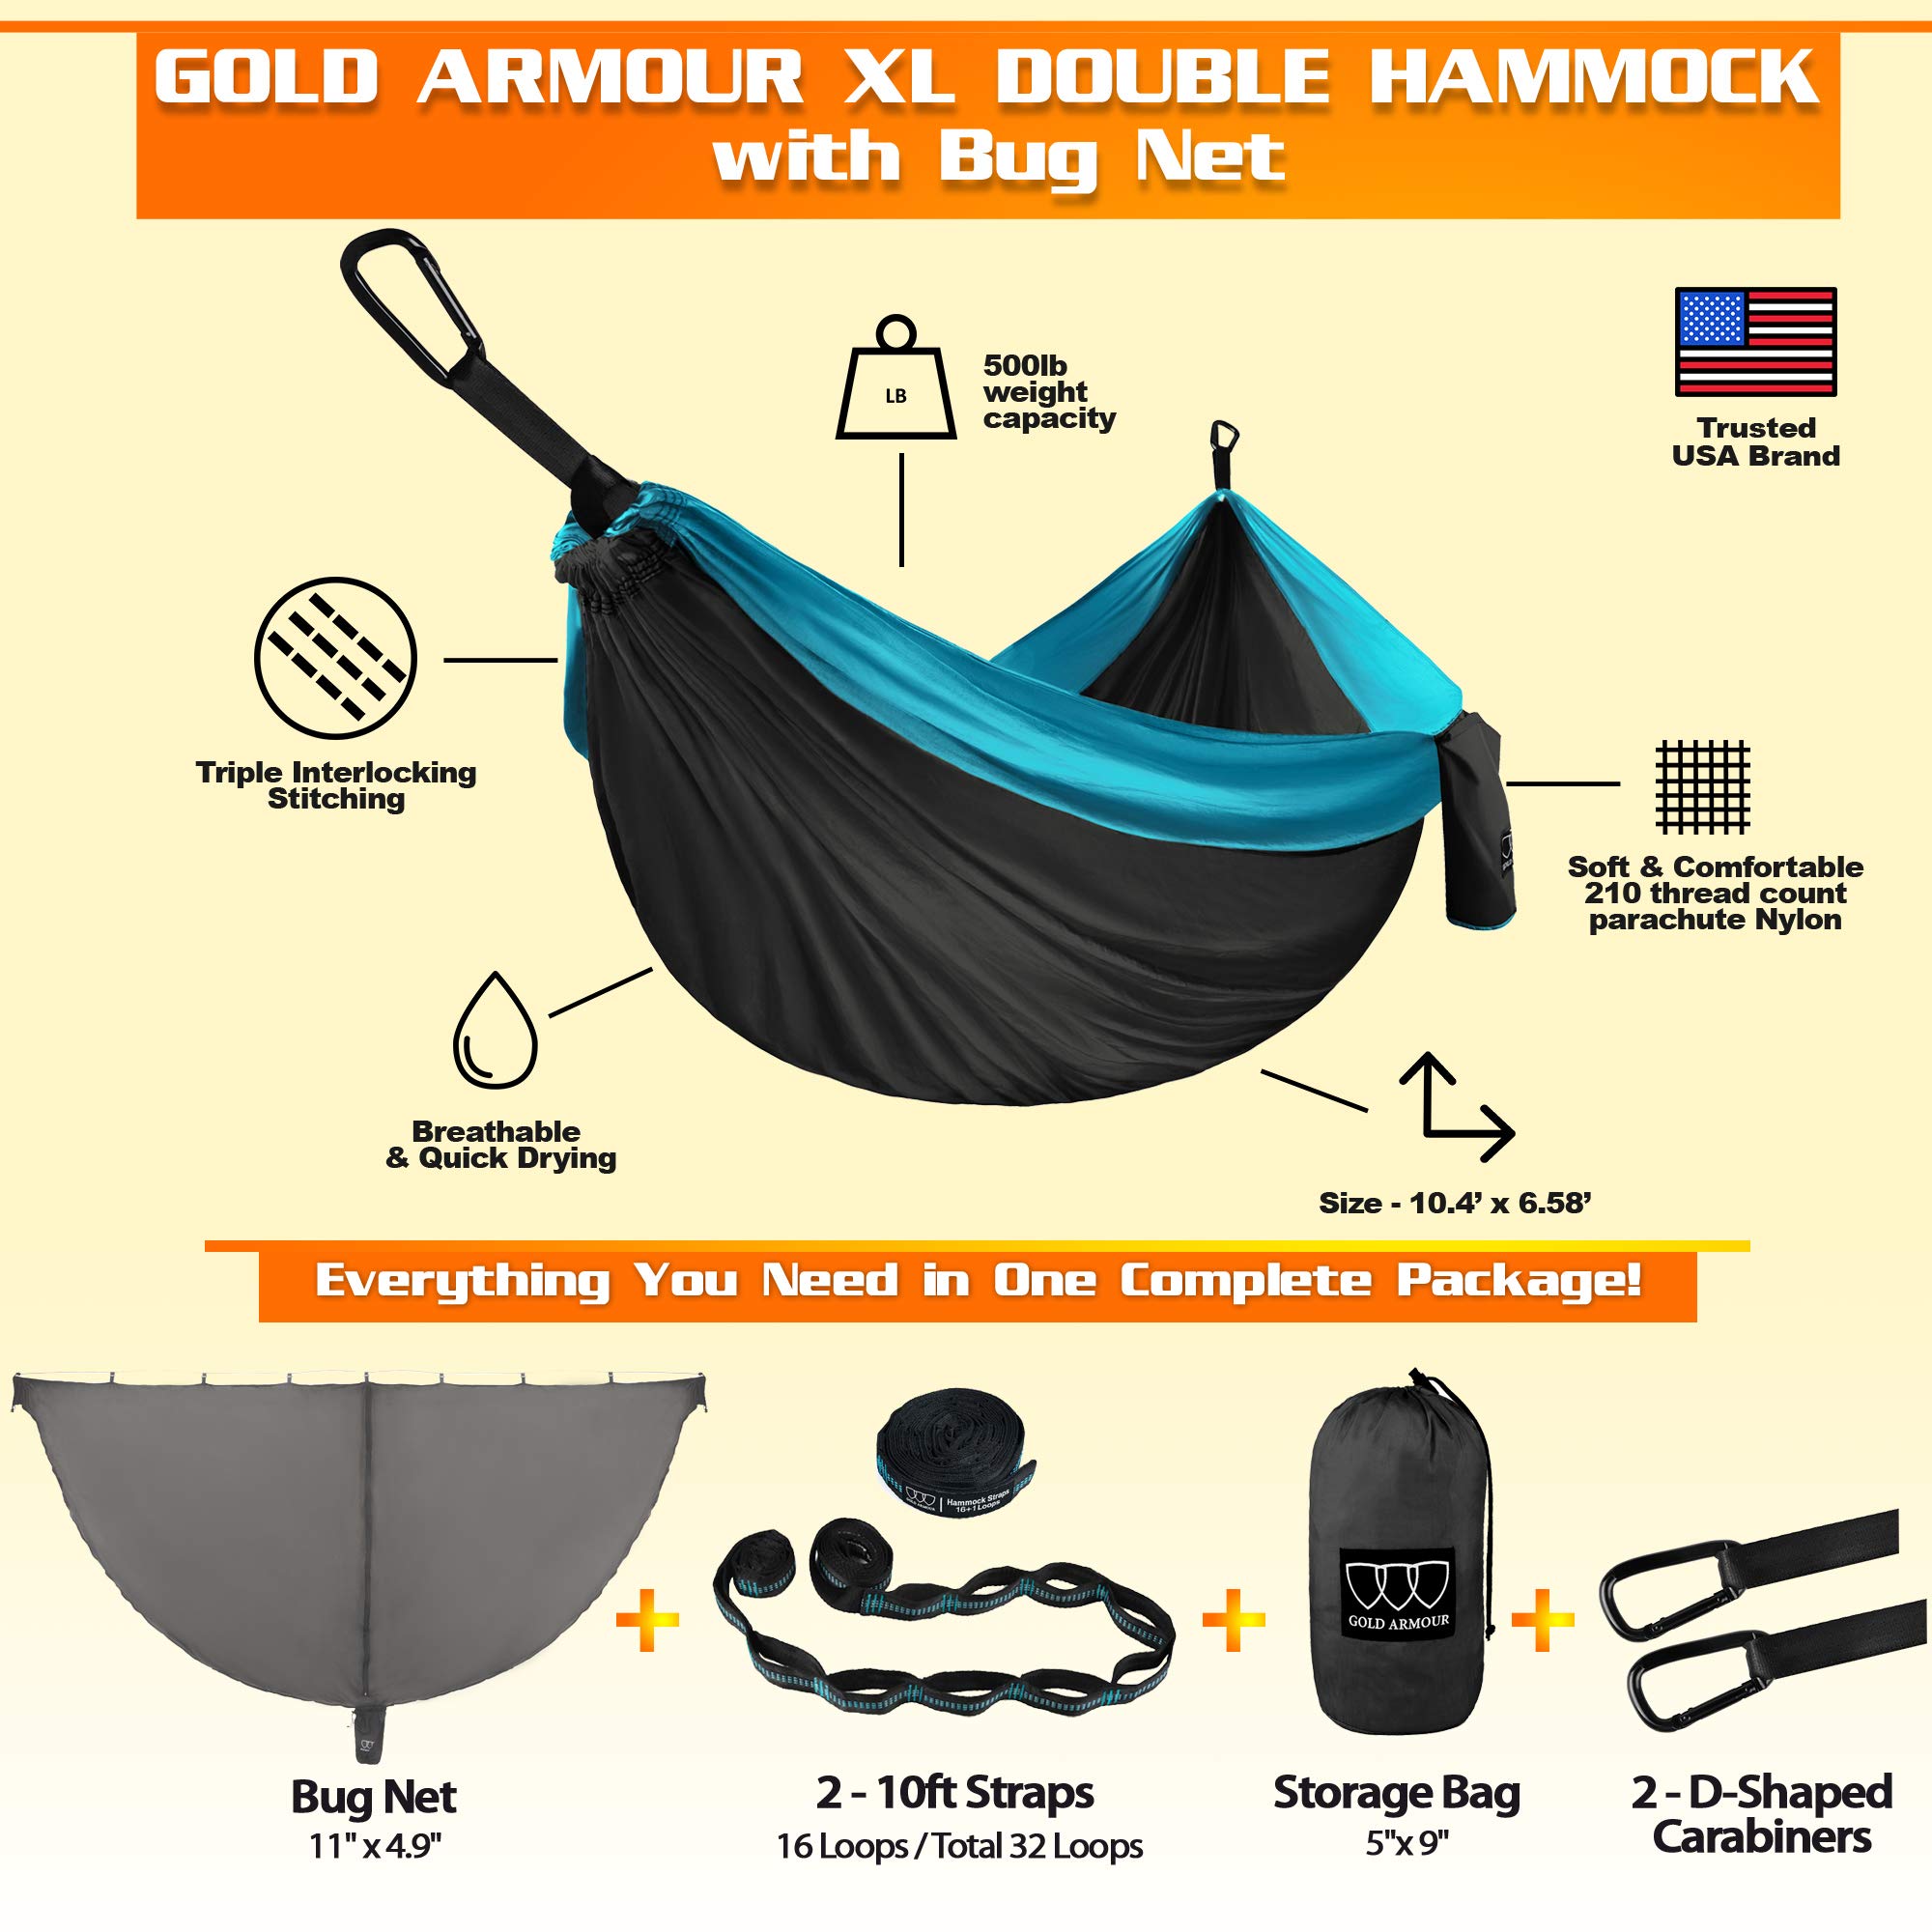 Gold Armour Camping Hammock - Extra Large Double Parachute Hammock (2 Tree Straps 32 Loops,20 ft Included) USA Brand Lightweight Nylon Adults Kids, Camping Accessories Gear (Gray with Bug Net)